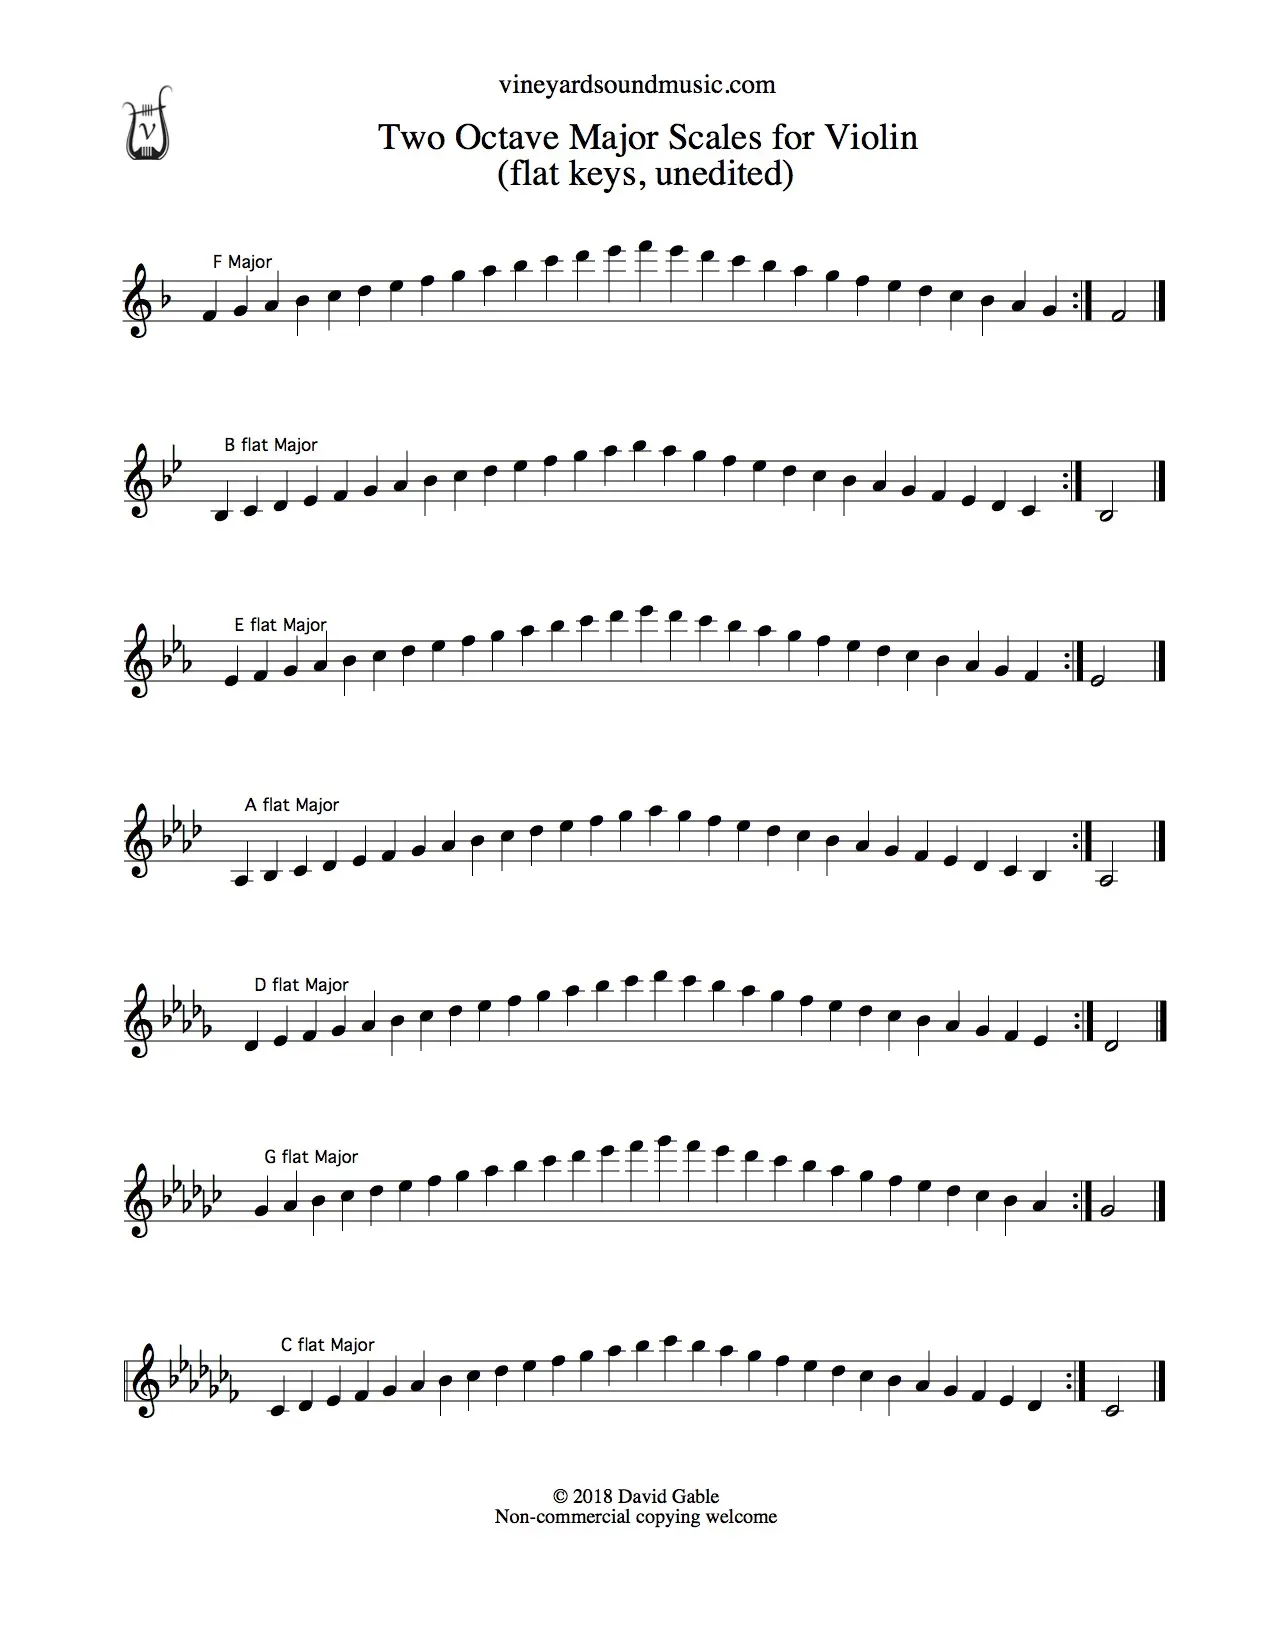 b flat major scale violin - What scale is equivalent to B flat major